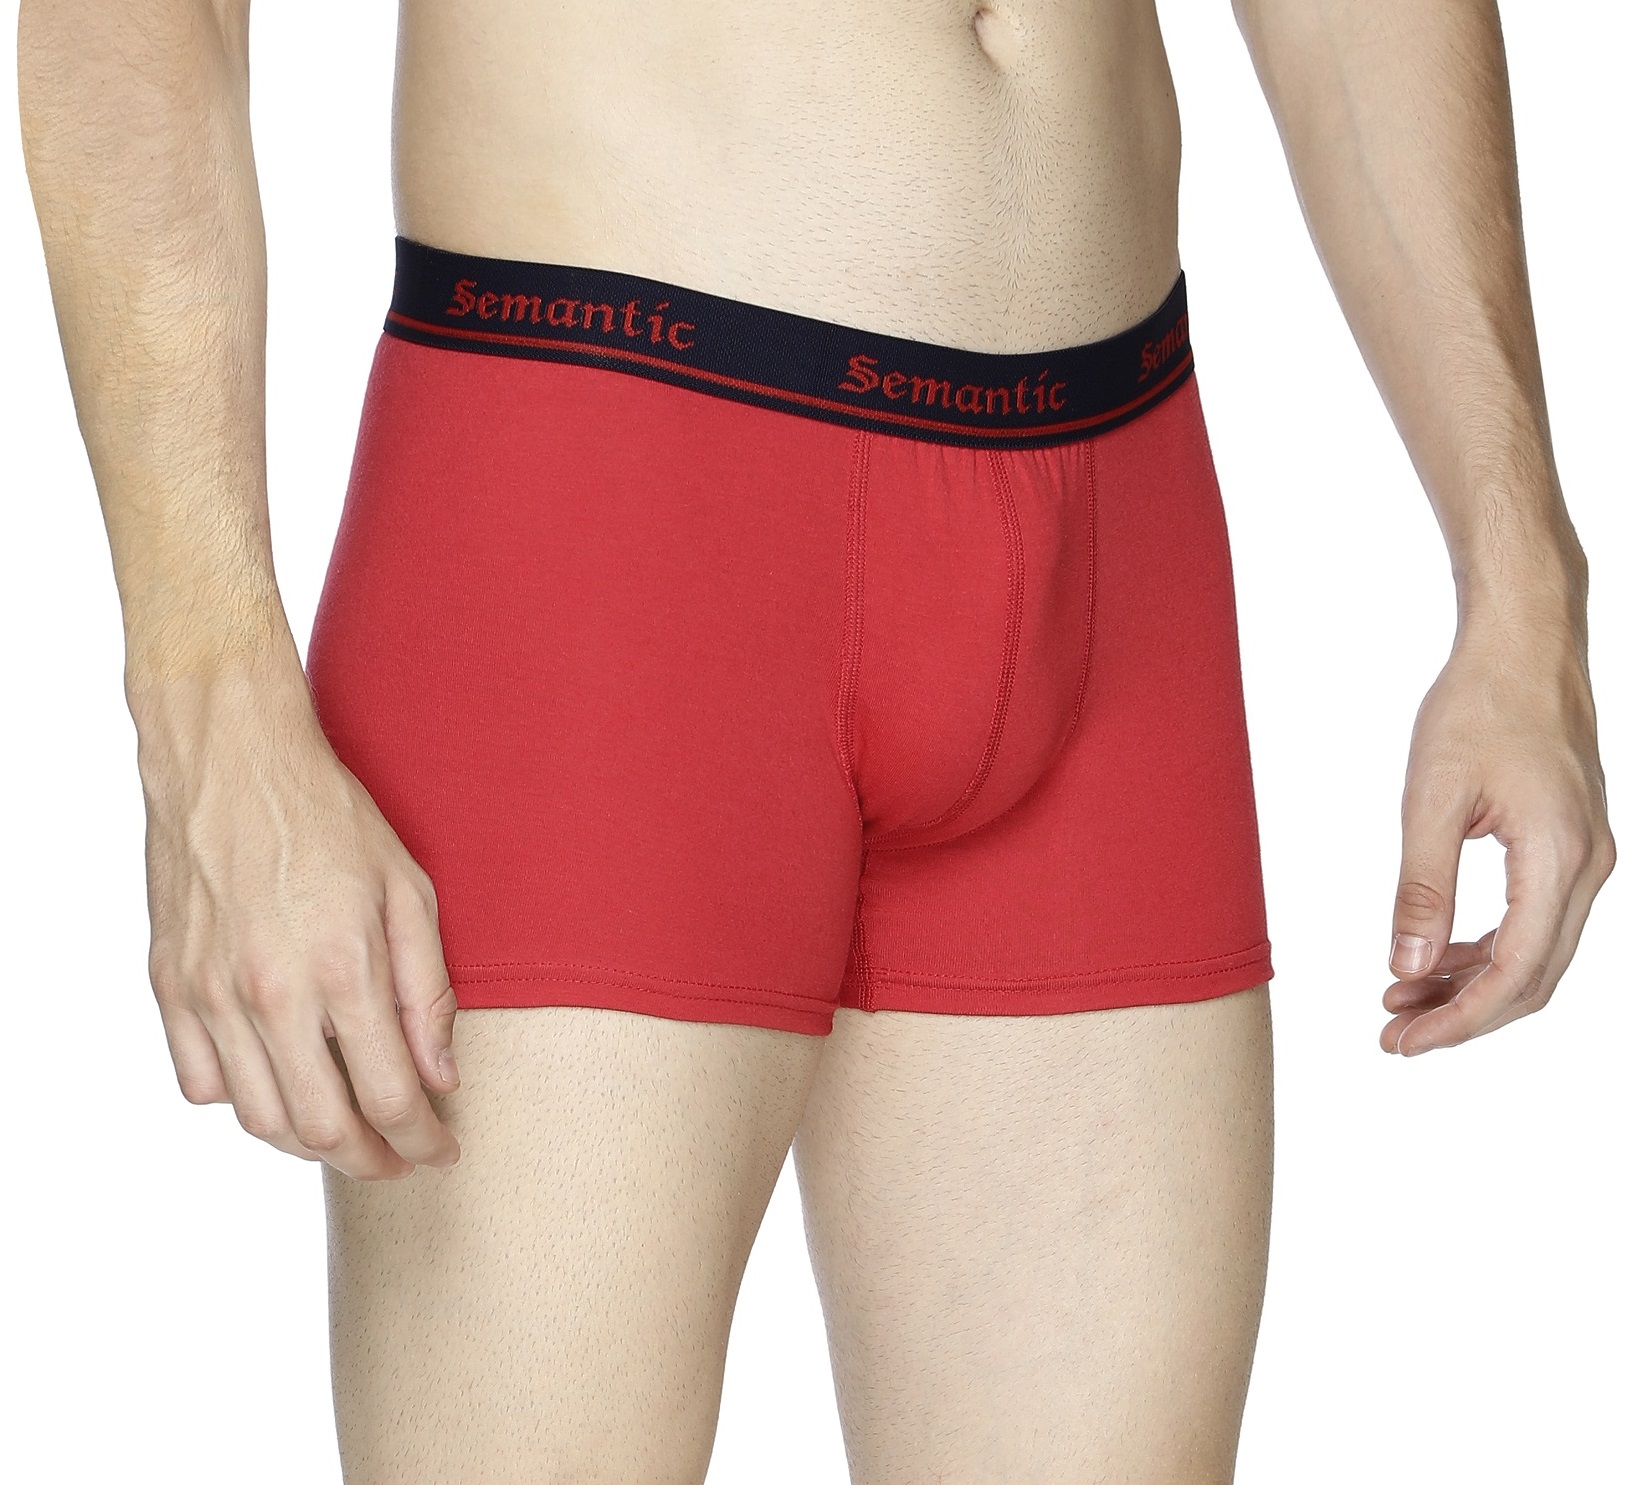 Buy Plain Trunk For Mens 100 Cotton Brief Underwear Available In Red Color In Size L Large